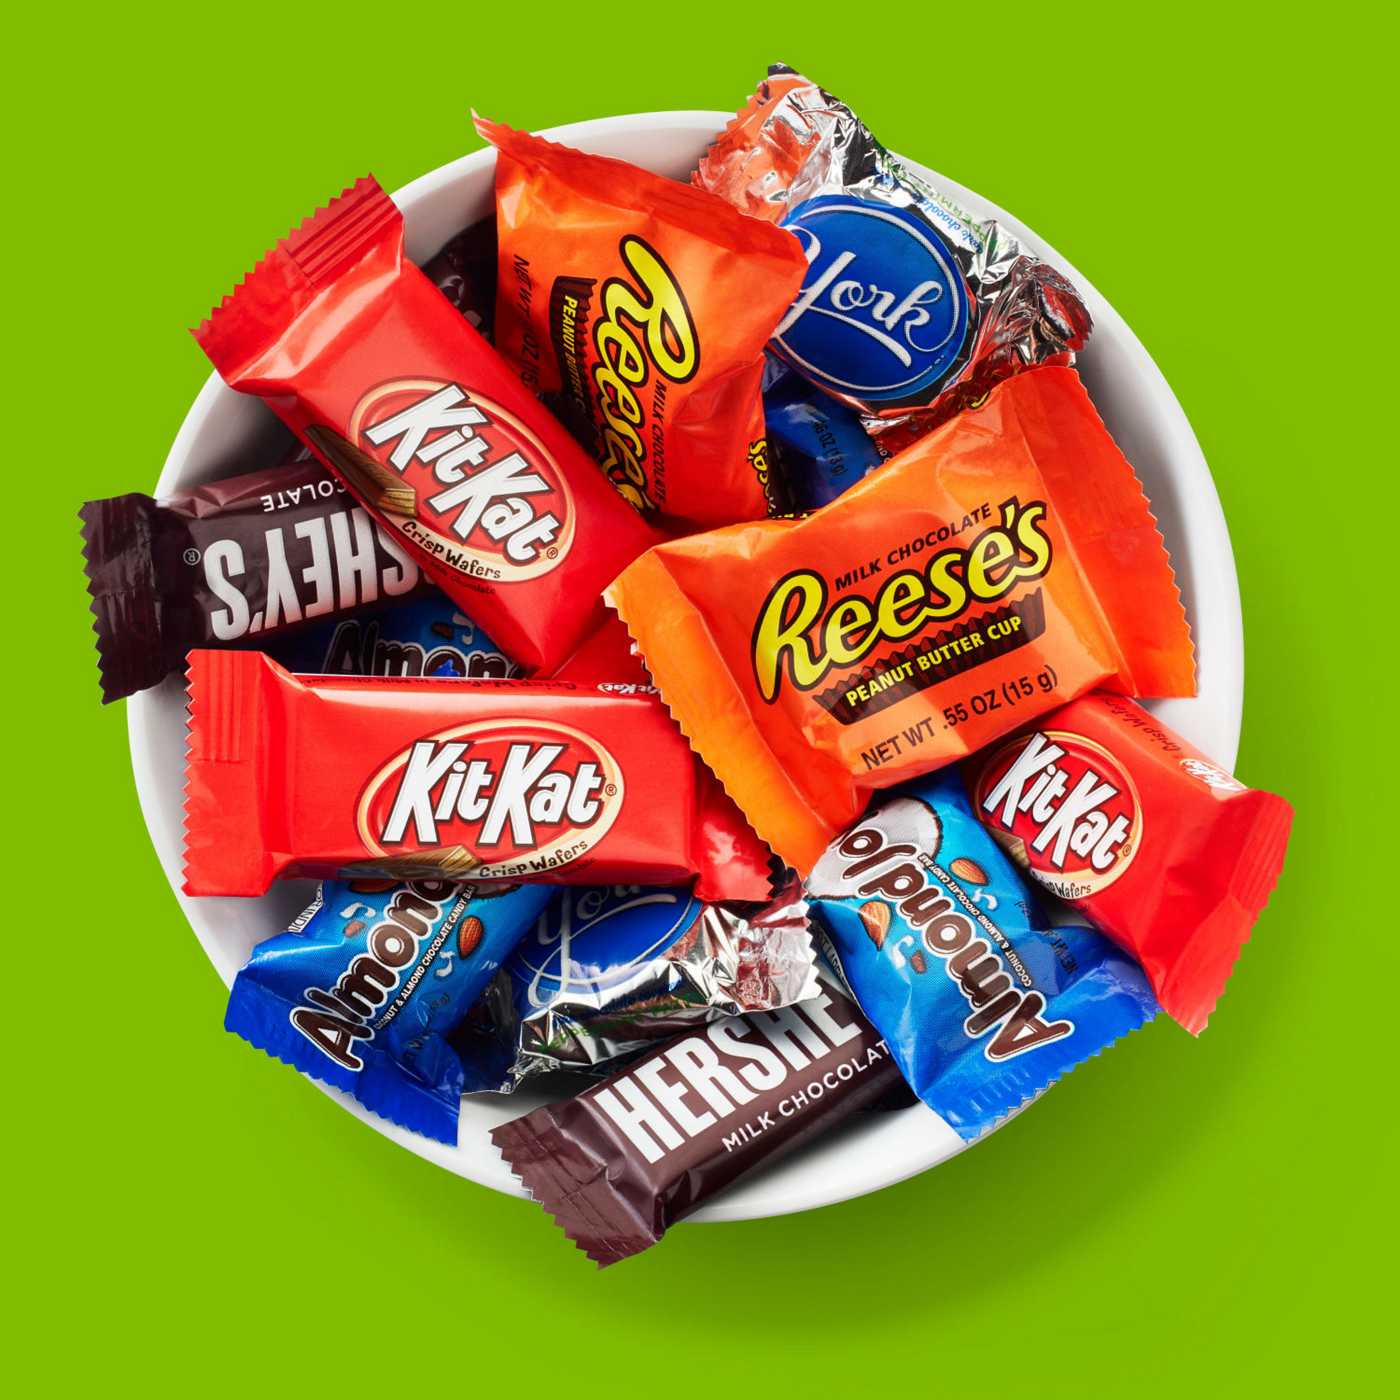 Hershey's, York, Reese's, Almond Joy, & Kit Kat Assorted Snack Size Chocolate Candy - Party Pack; image 6 of 7